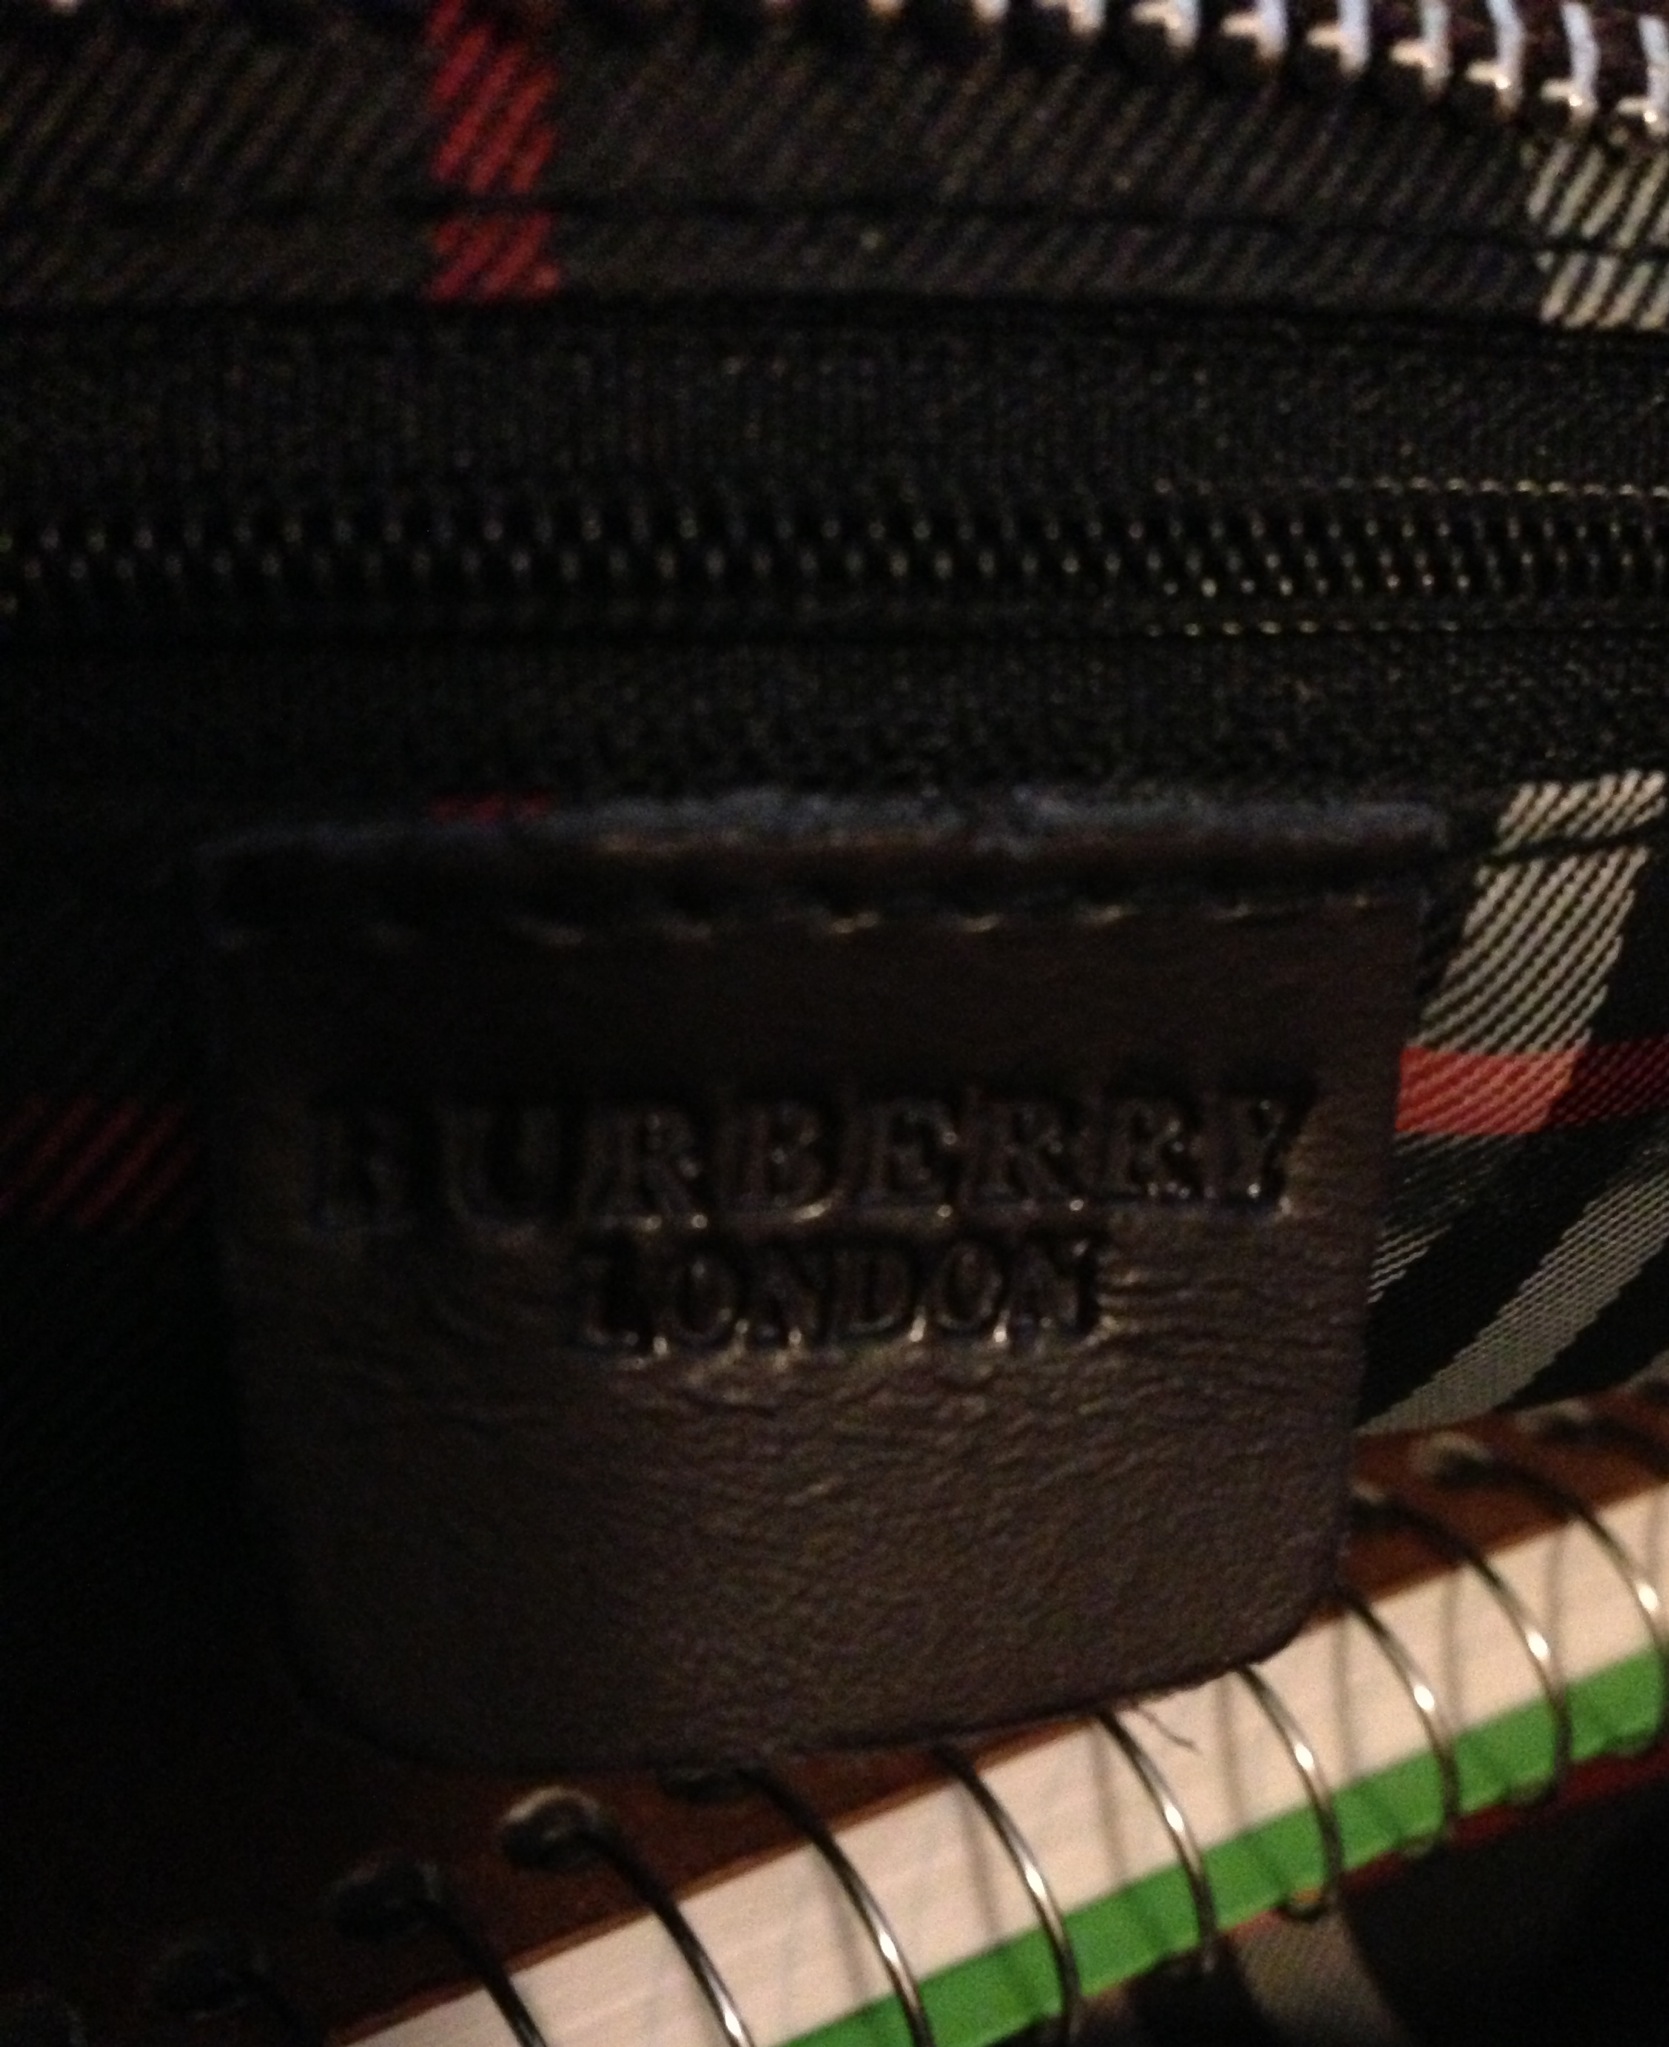 burberry bag made in china